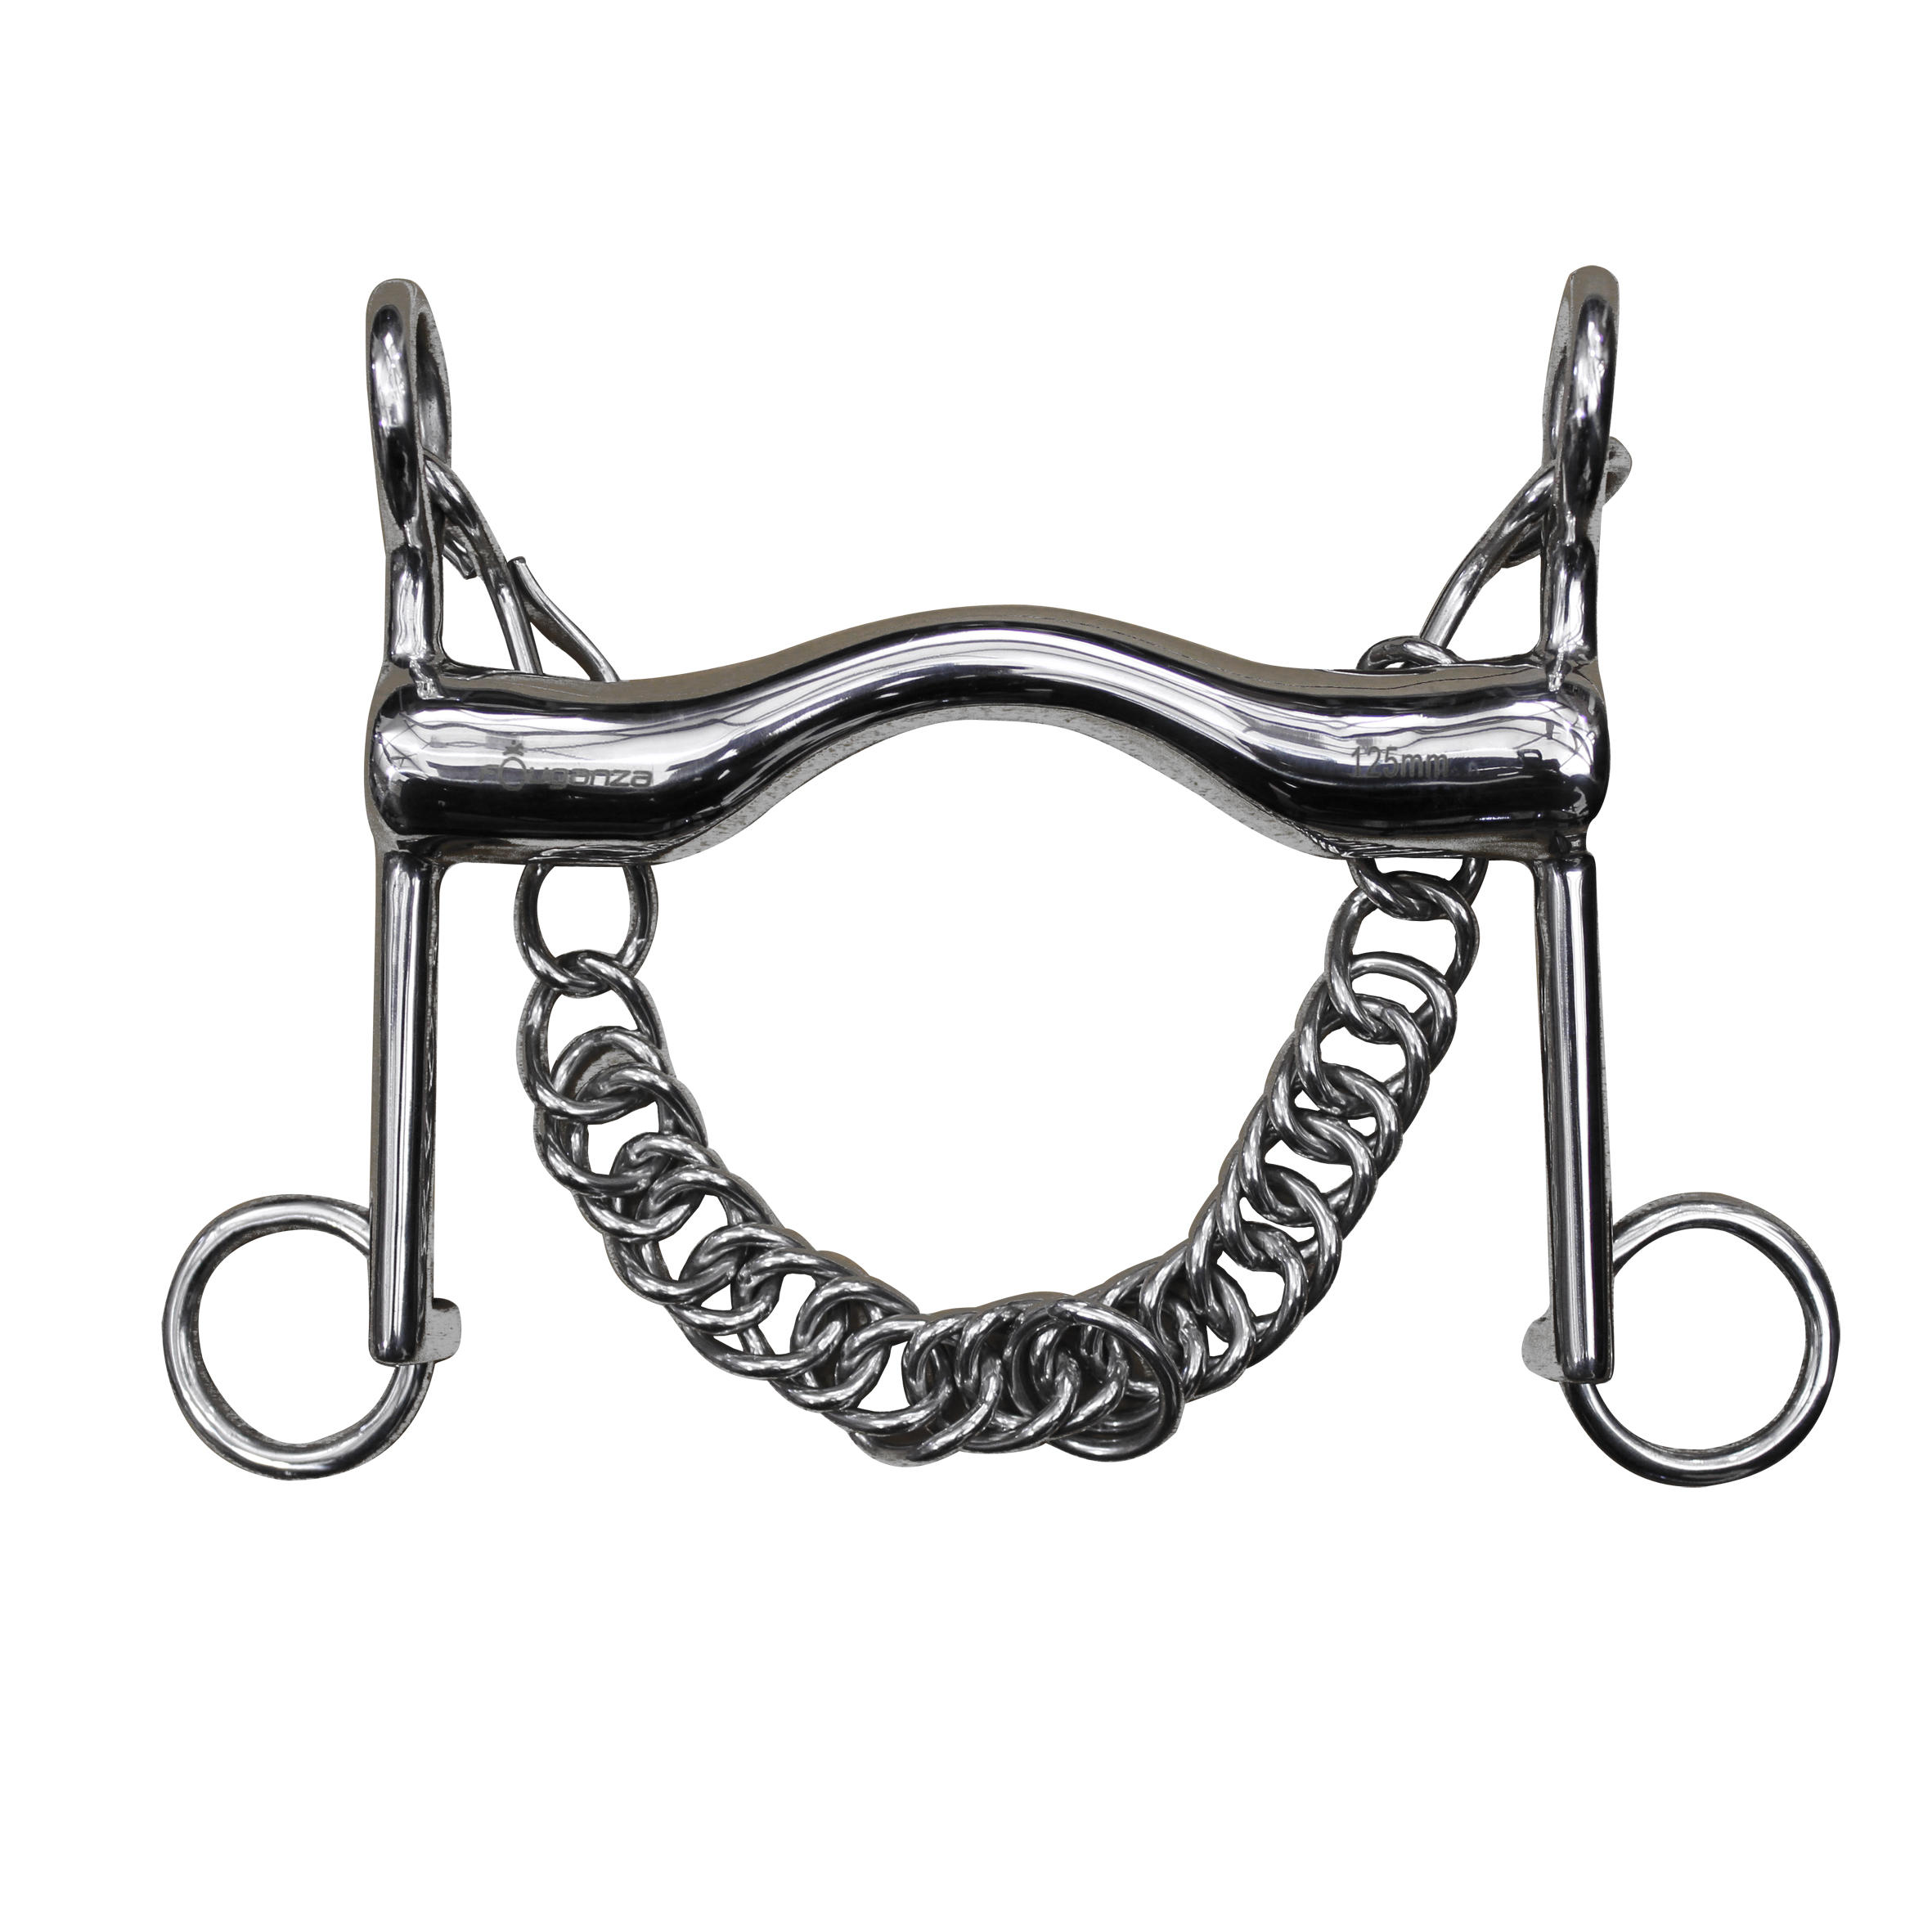 FOUGANZA Lhotte Stainless Steel Horse Riding Bridoon Bit for Horse Or Pony